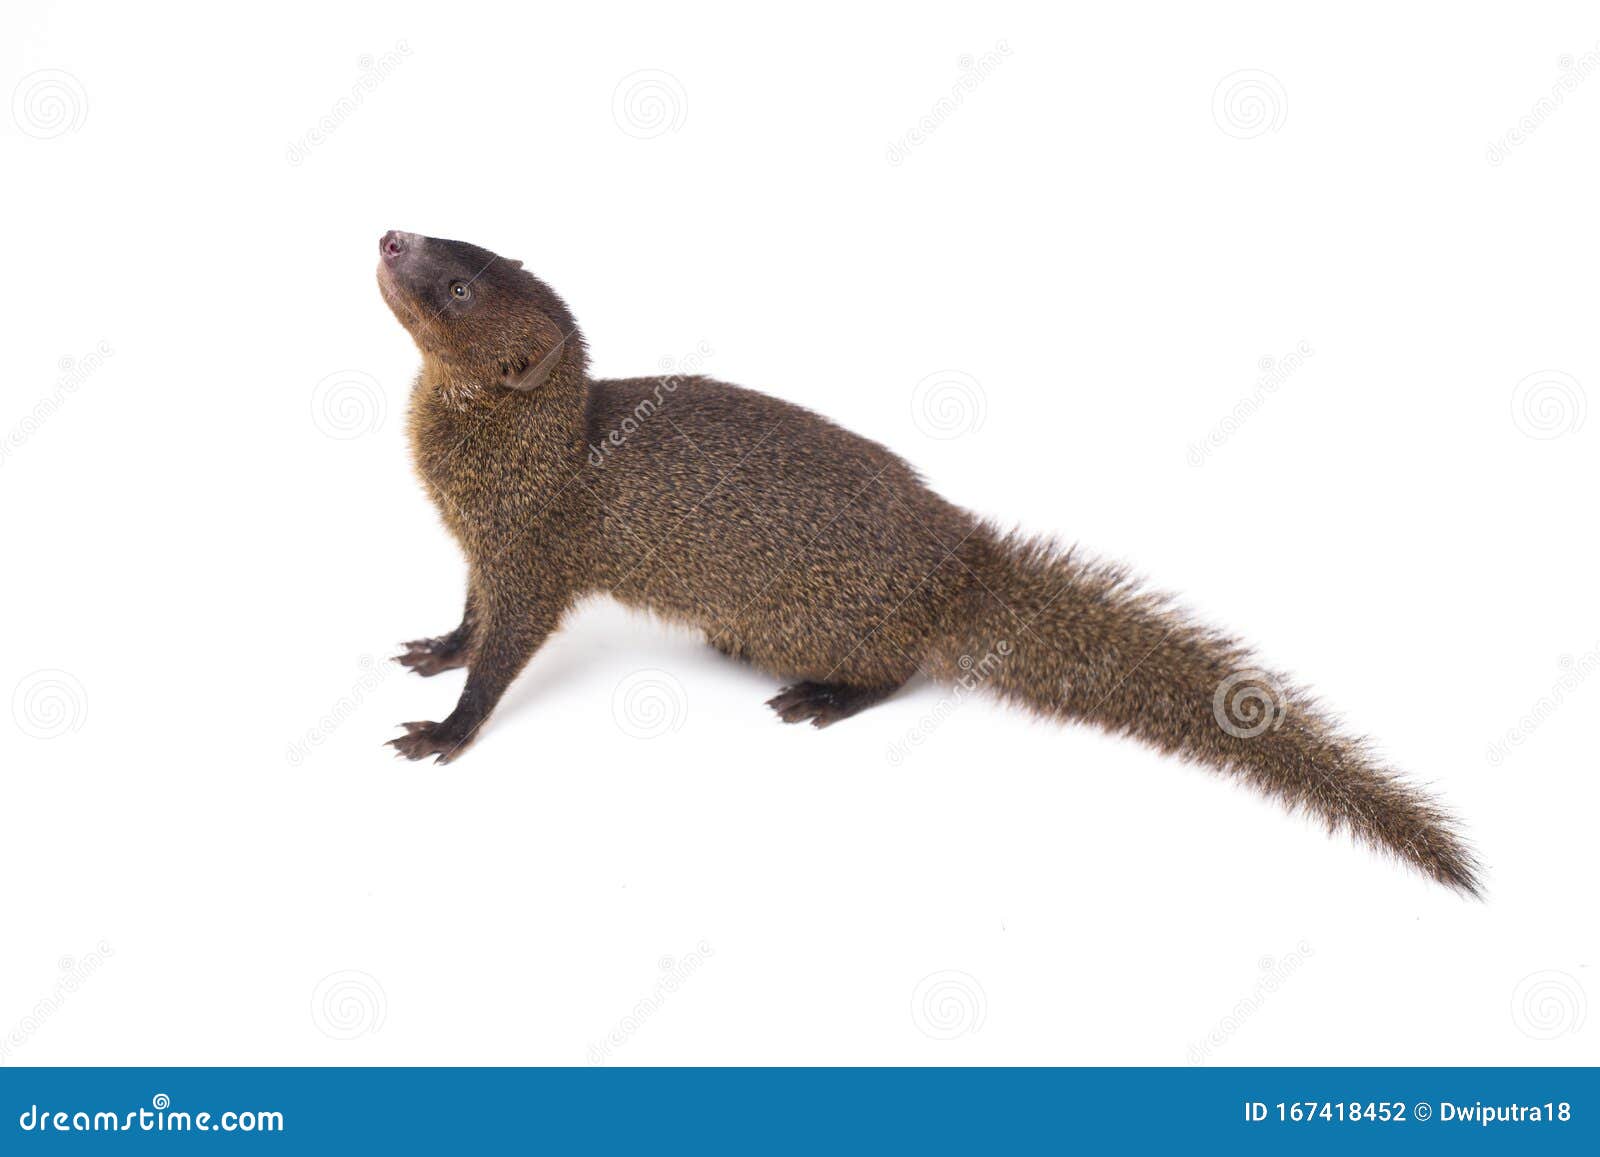 close up of javan mongoose or small asian mongoose herpestes javanicus  on white